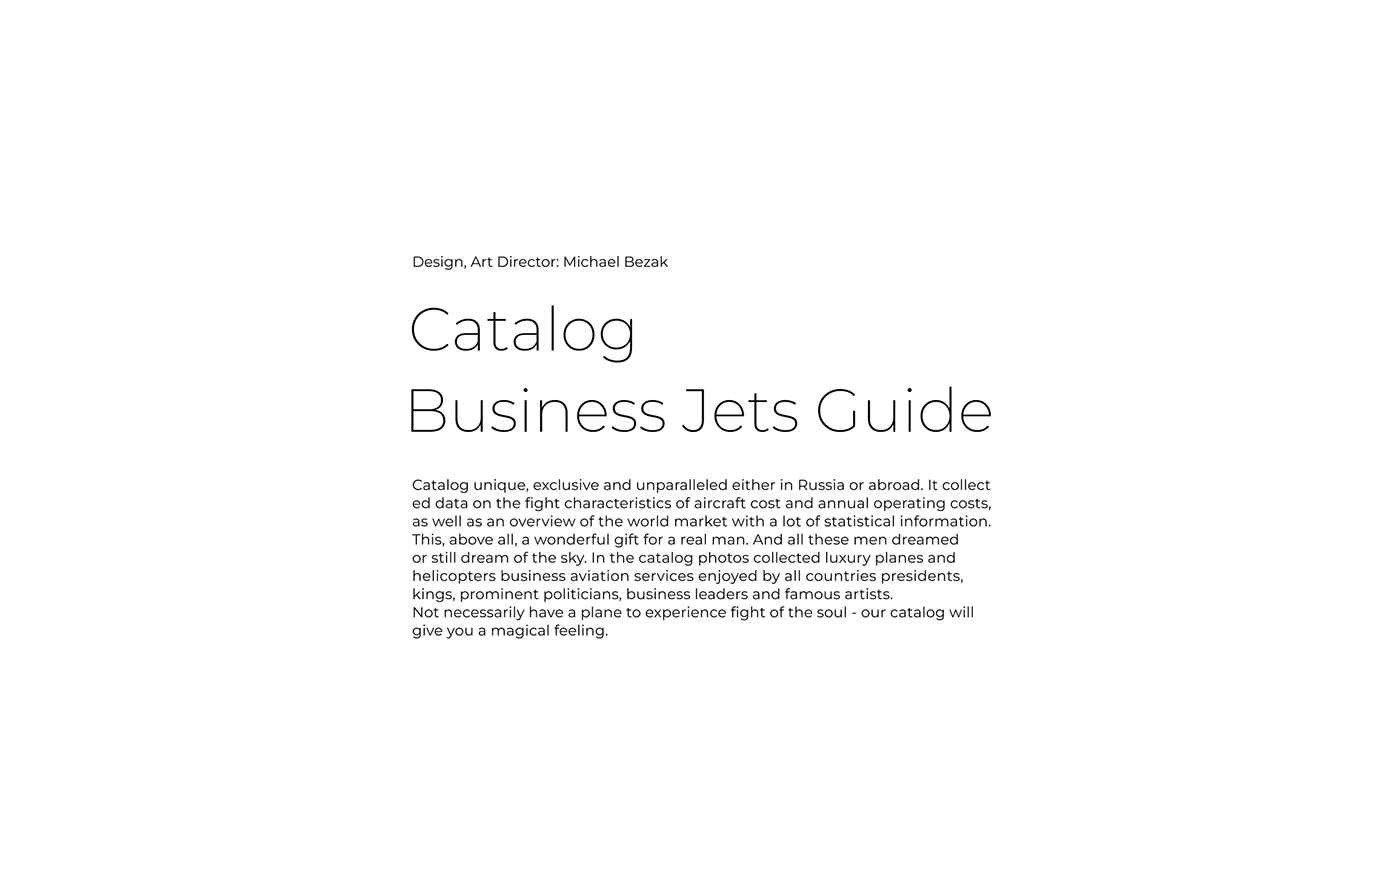 business jets guide Catalog Business Jets catalog Web brend Icon logo Style font Project portal catalog of aircraft aviation airline Travel